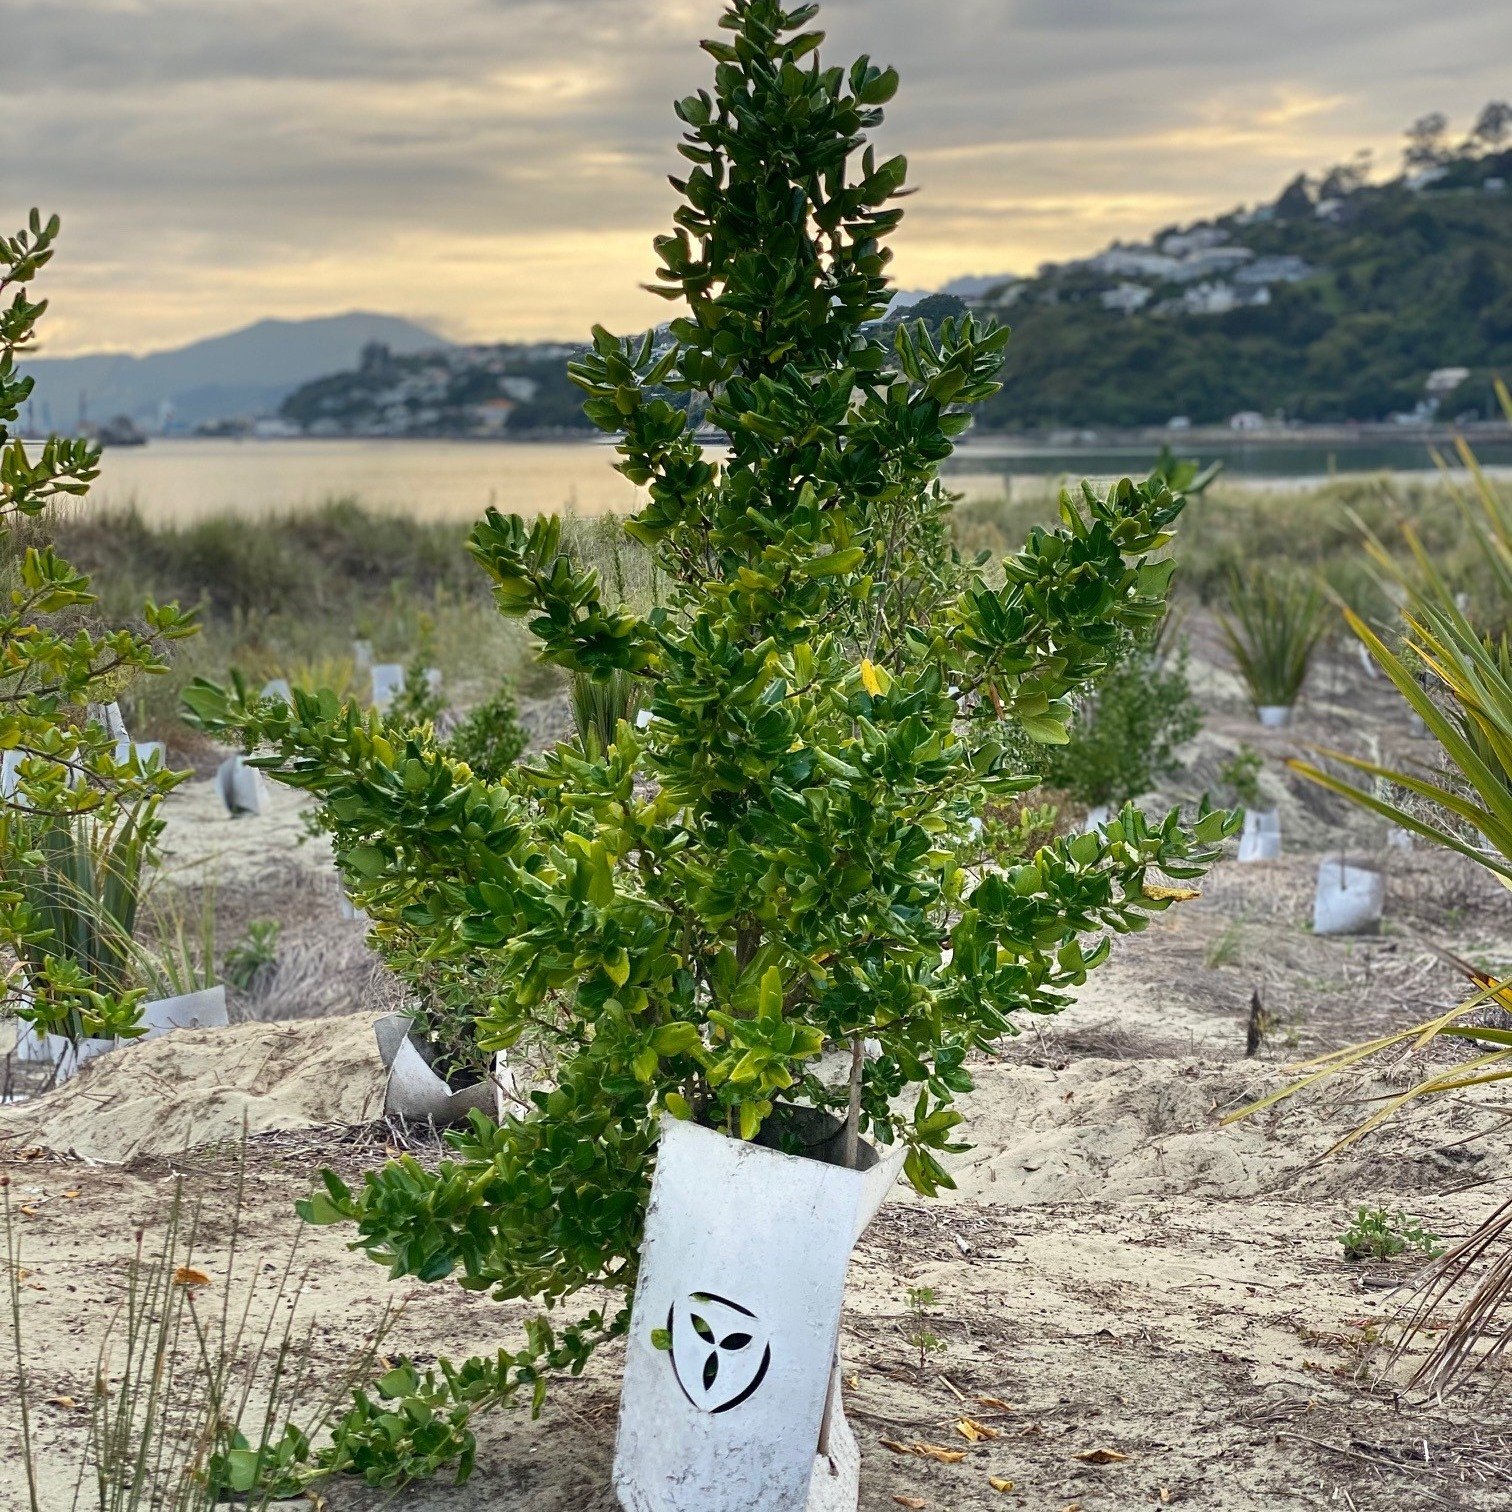 This EmGuard was pictured at over a year old in the Tahunanui sand dunes. Look how well this taupata / Coprosma repens is doing. Taupata feature thick, dark-green, and glossy leaves and they are an excellent choice for coastal planting 🌊

#SaveThePl